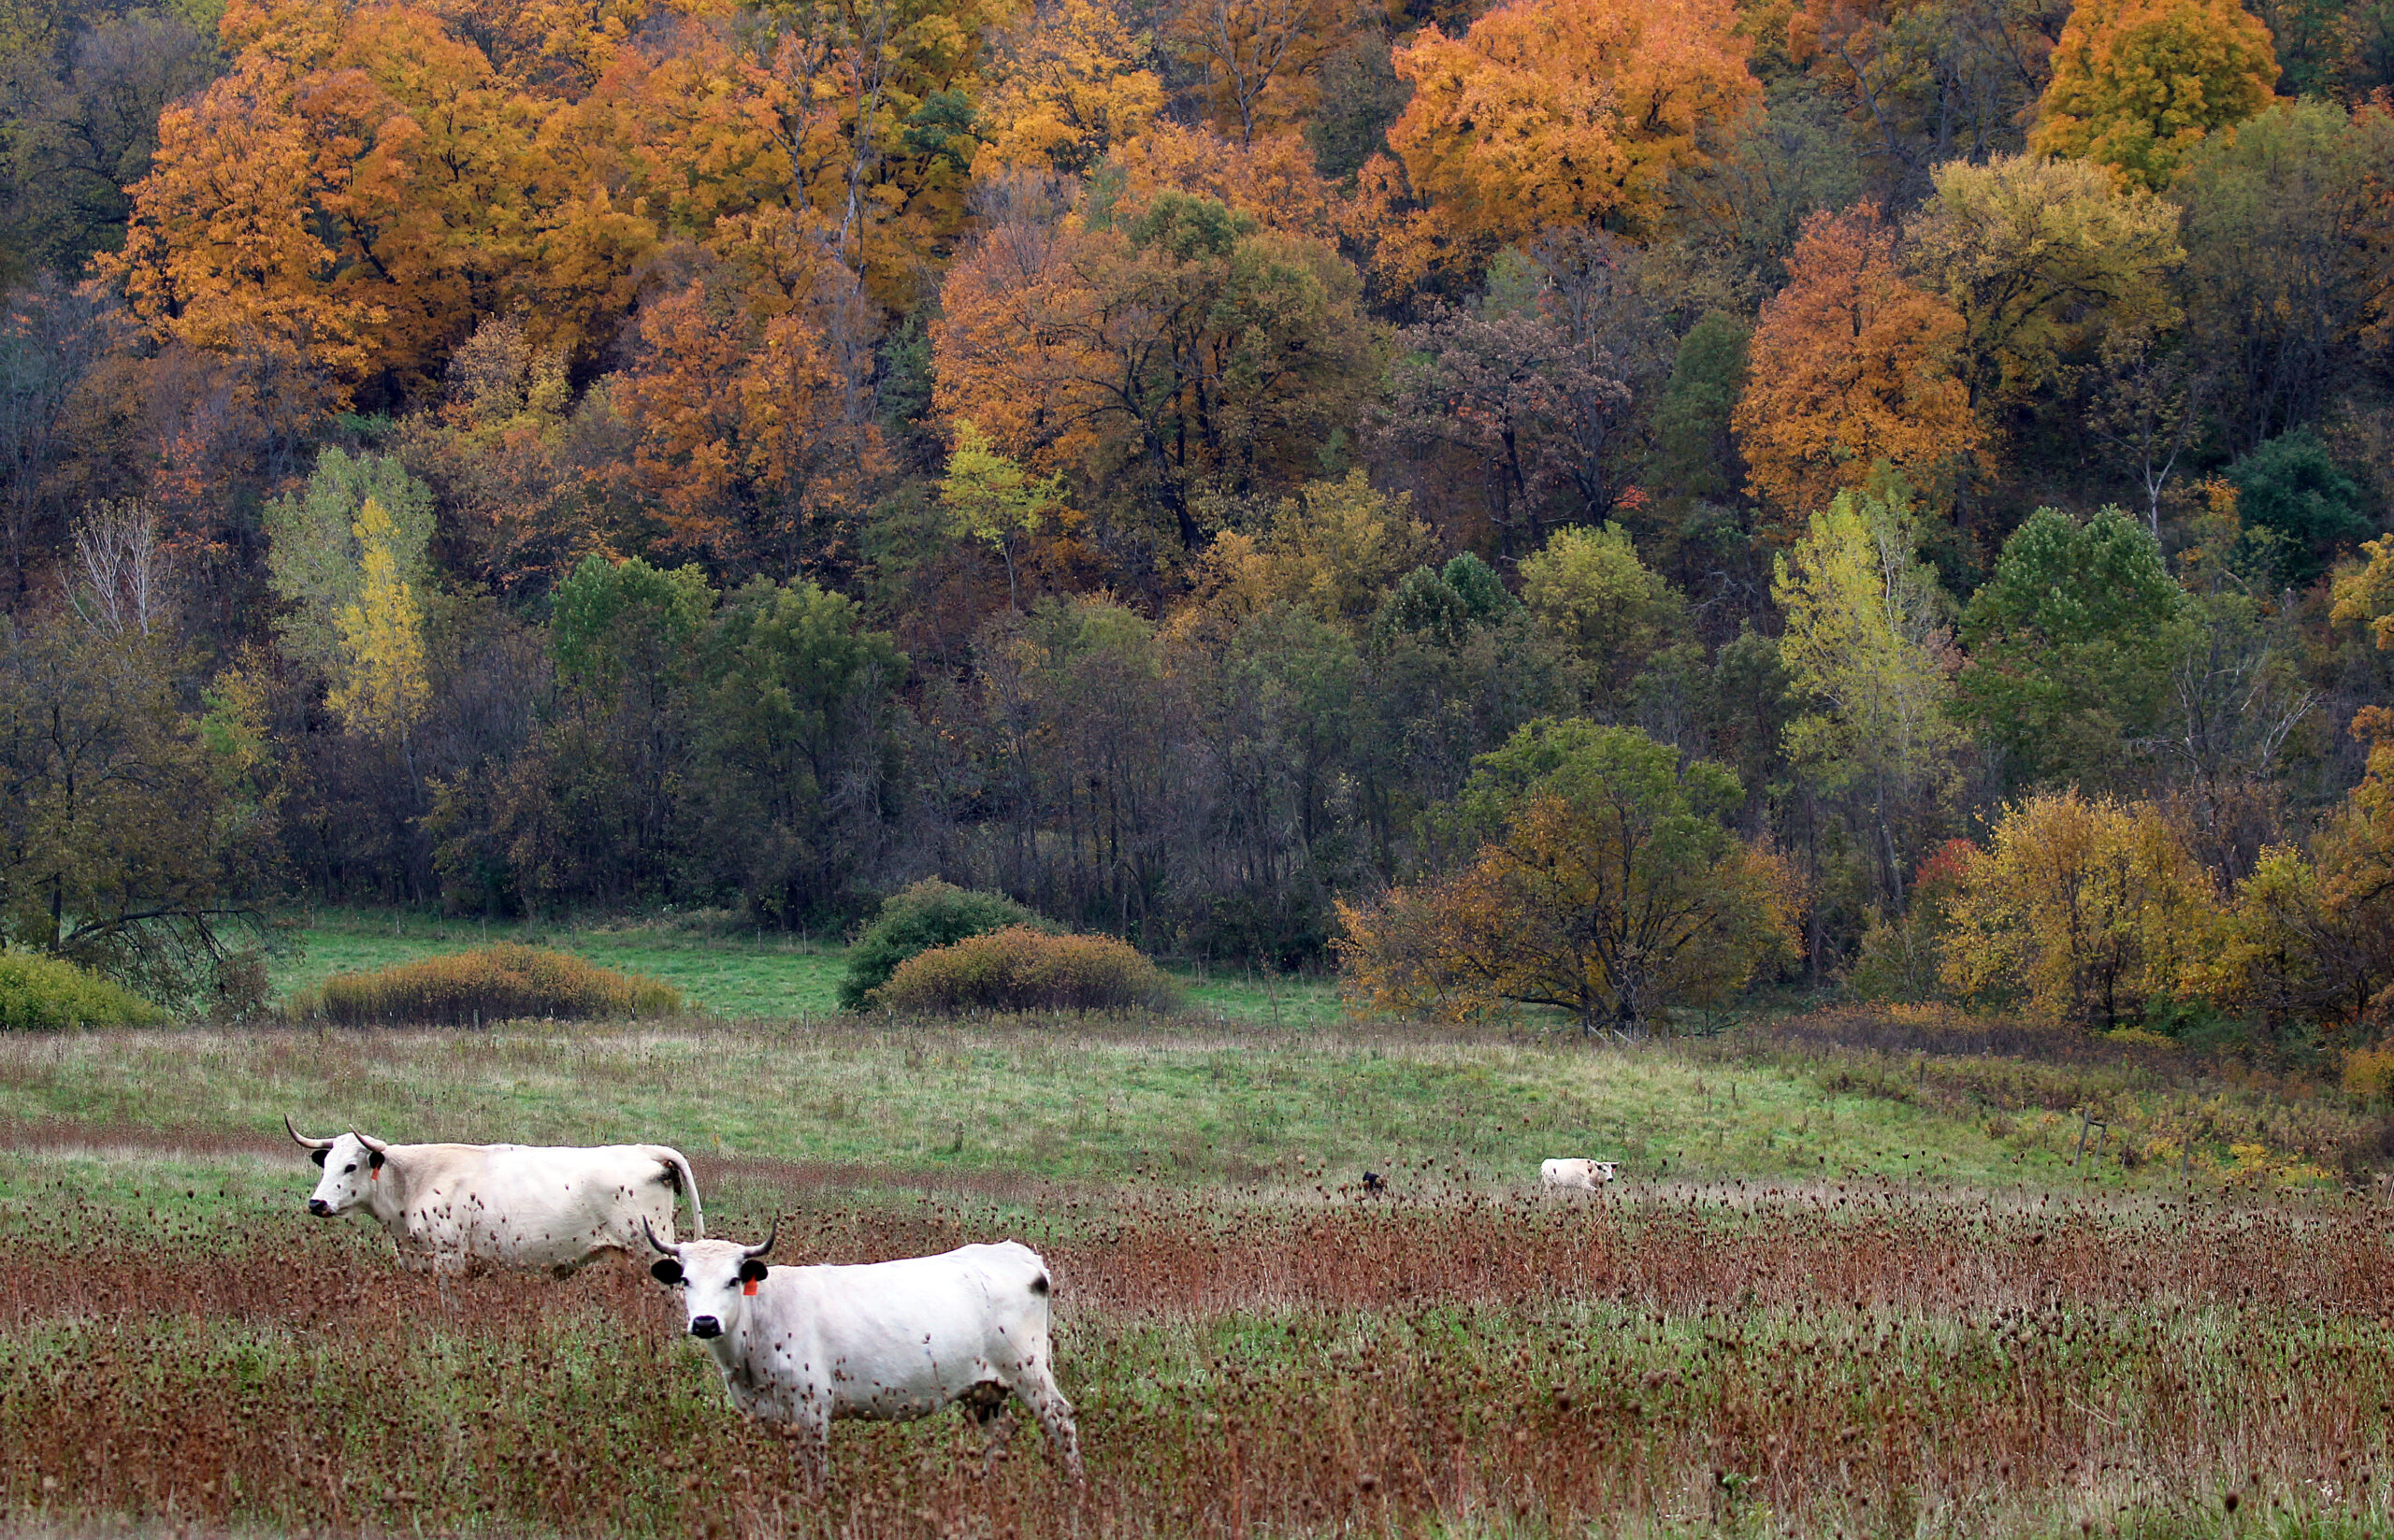 Several white cattle in a field with bright orange-colored trees in the distance